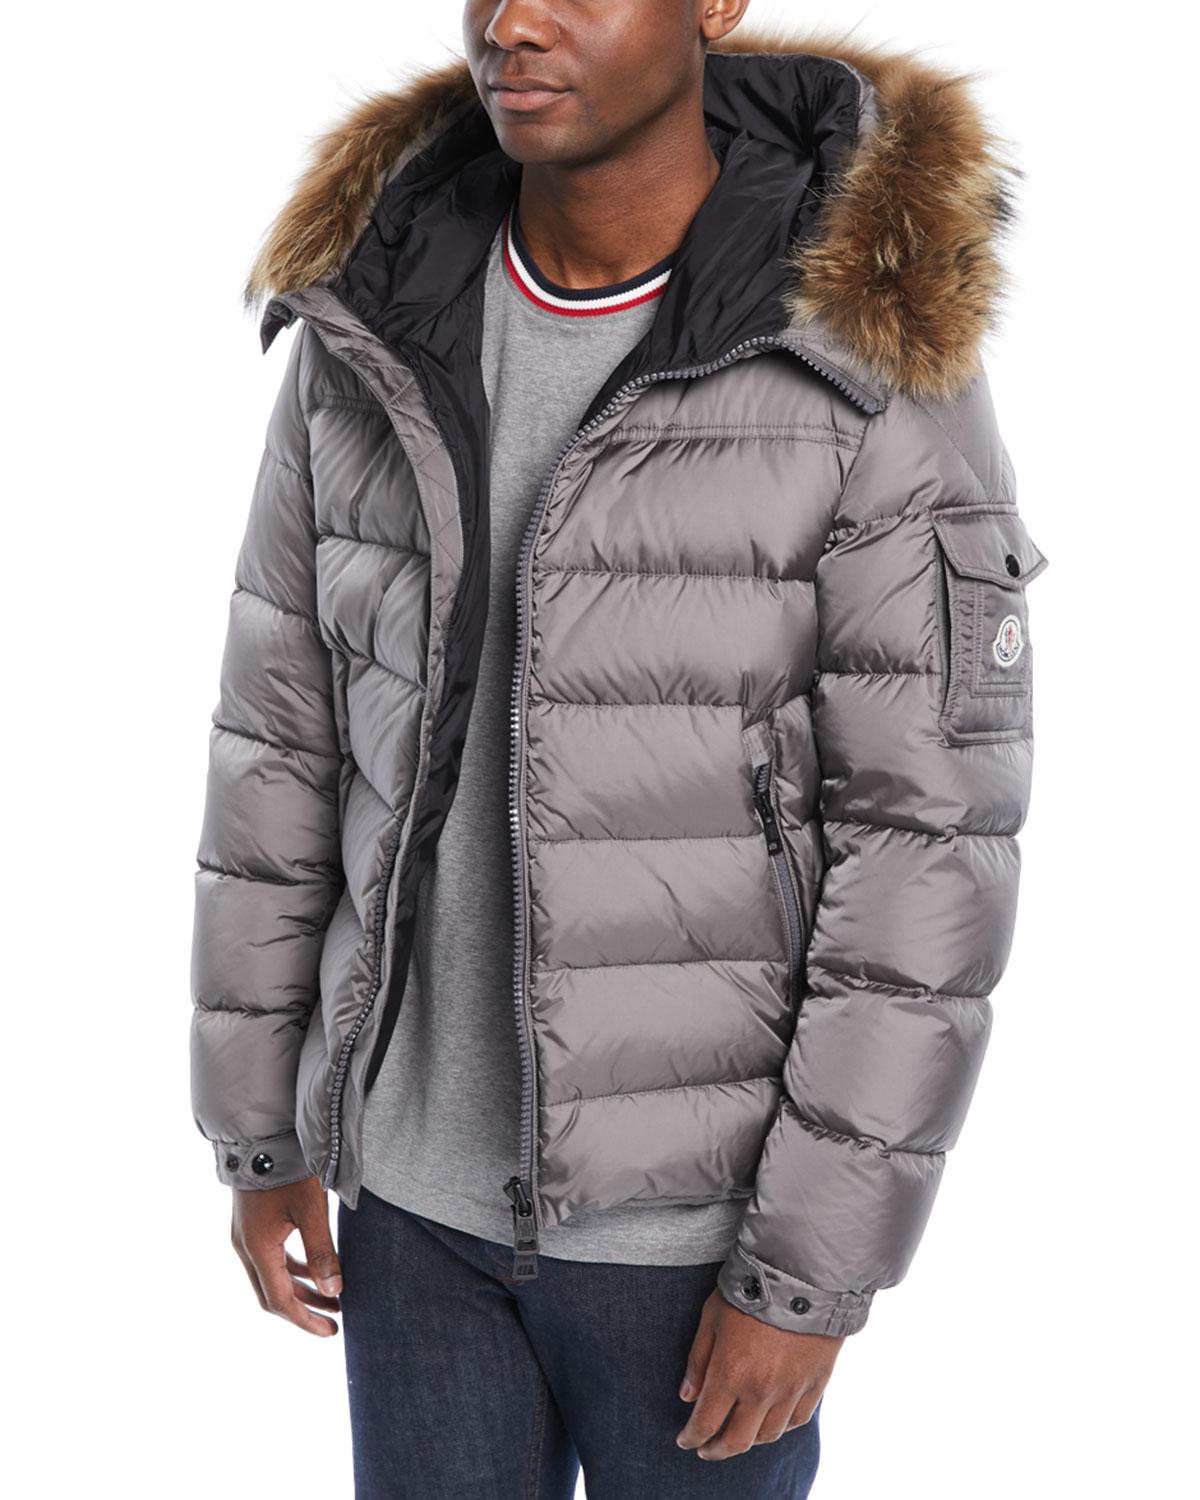 moncler puffer with fur